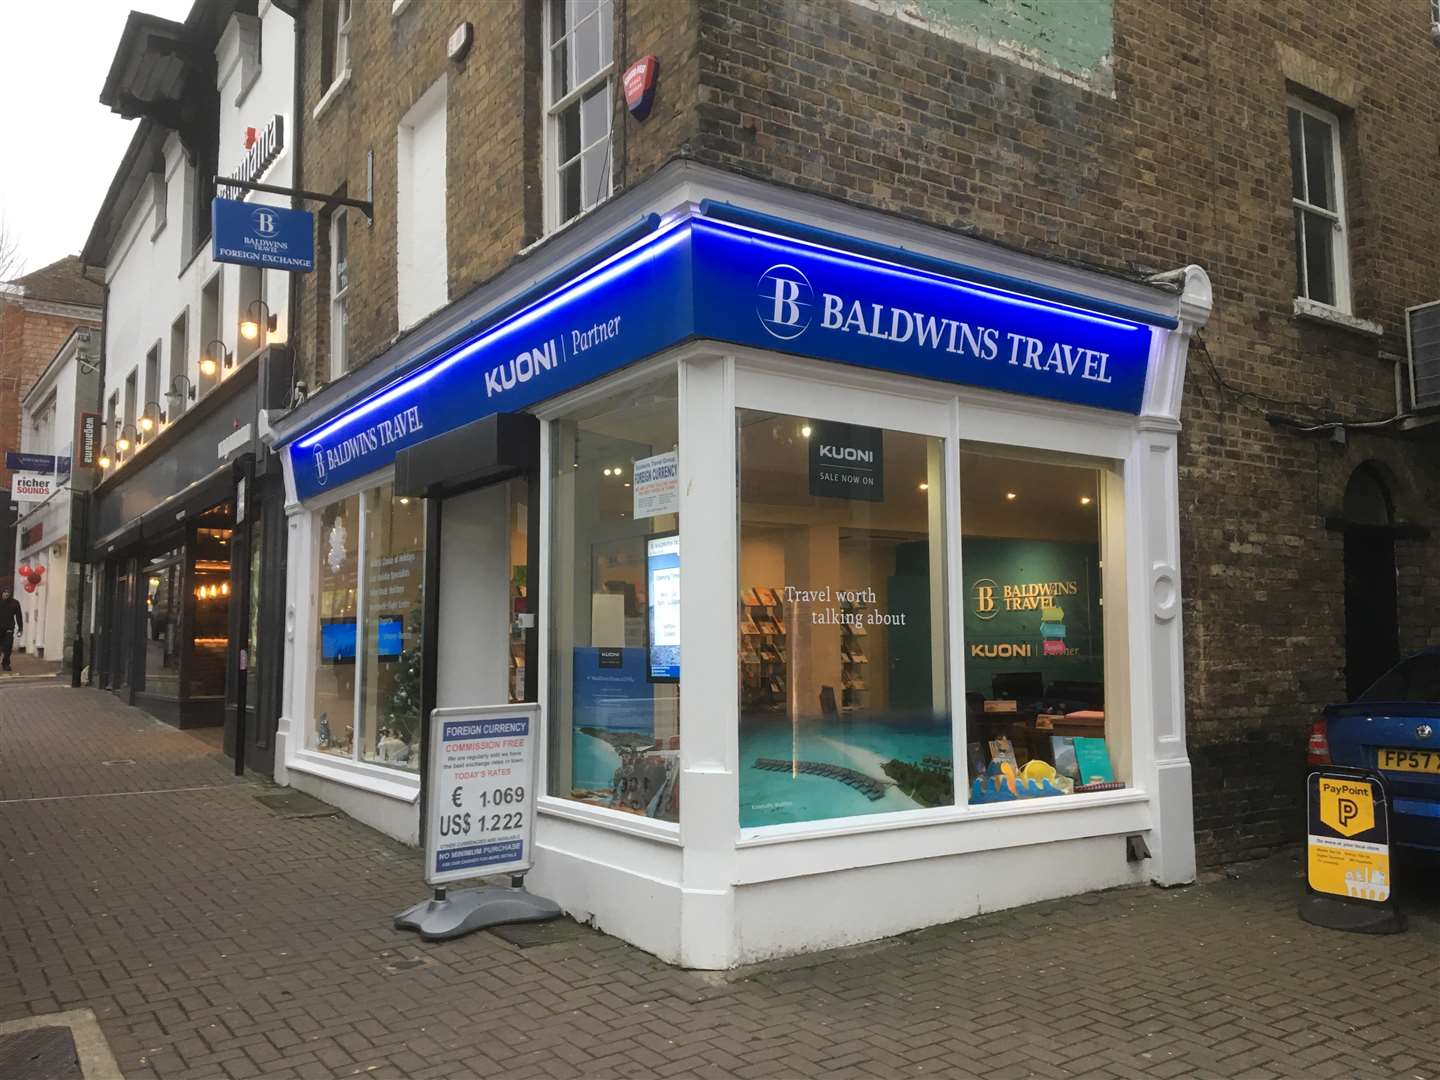 The new branding on the Maidstone branch of Baldwins Travel (6705391)